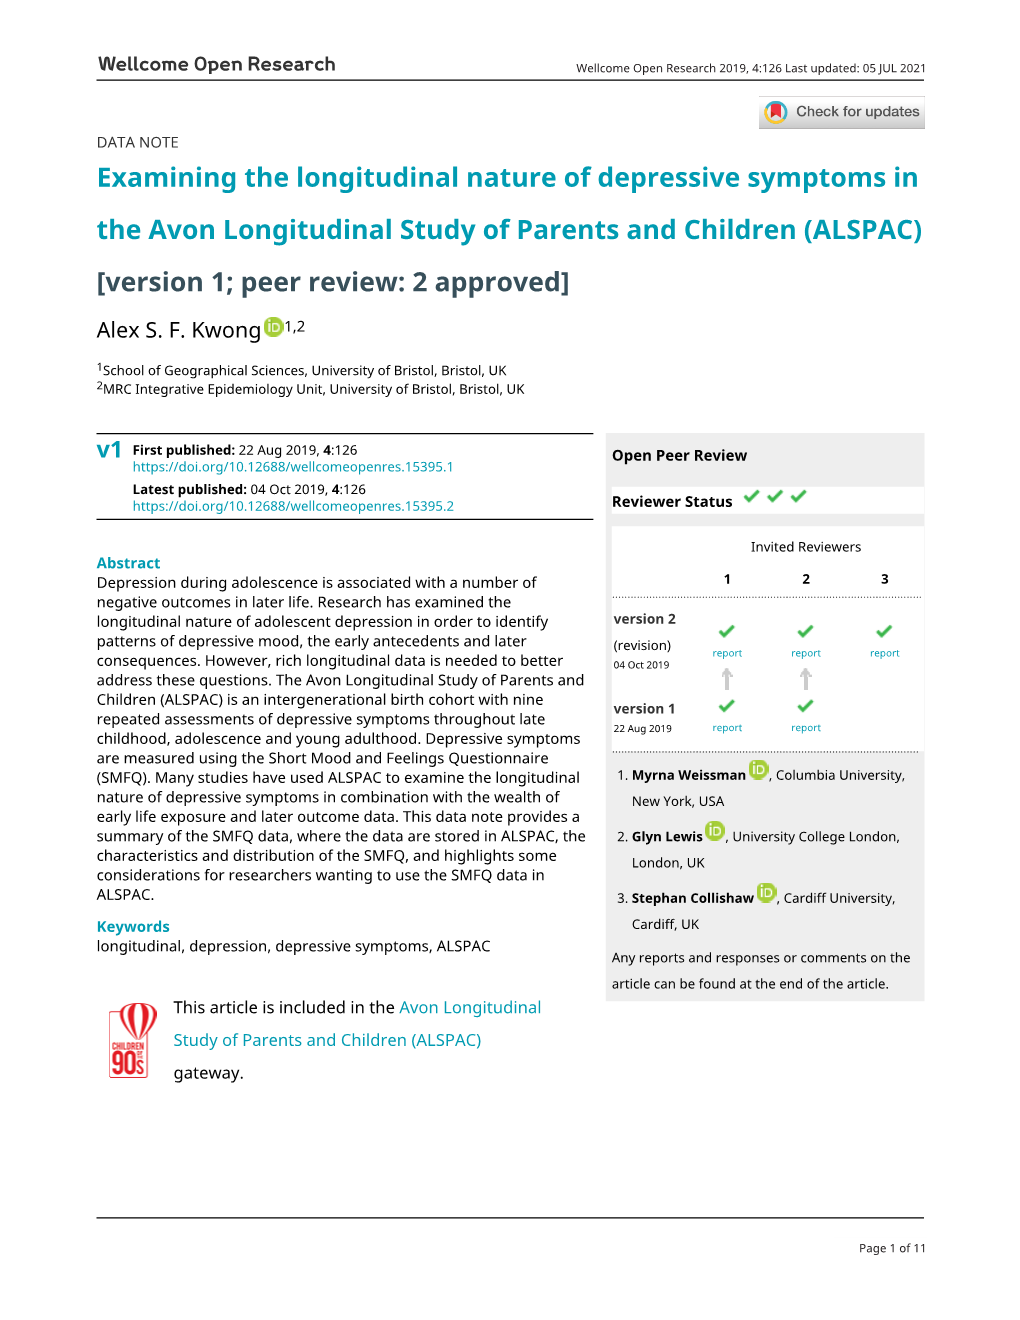 Examining the Longitudinal Nature of Depressive Symptoms in the Avon Longitudinal Study of Parents and Children (ALSPAC) [Version 1; Peer Review: 2 Approved]